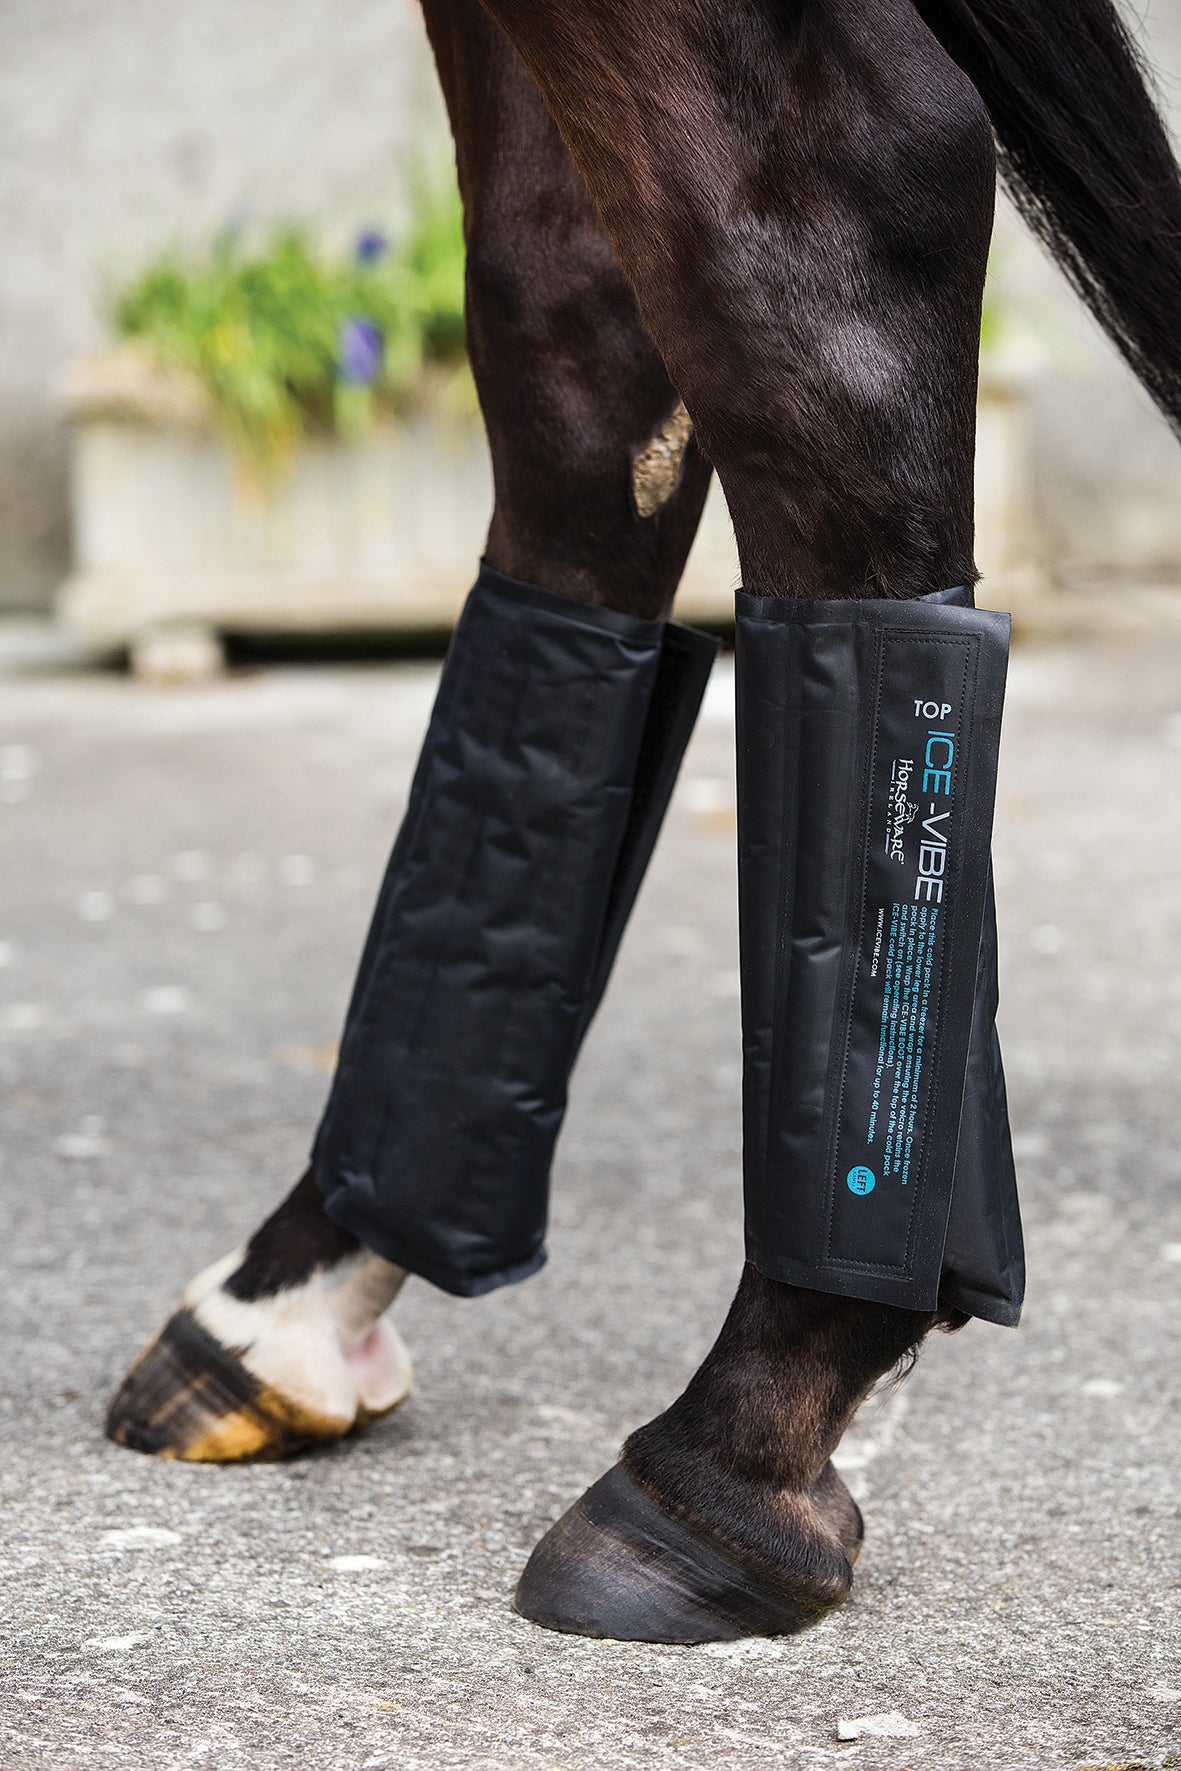 Horseware Ice-Vibe Replacement Cool Packs